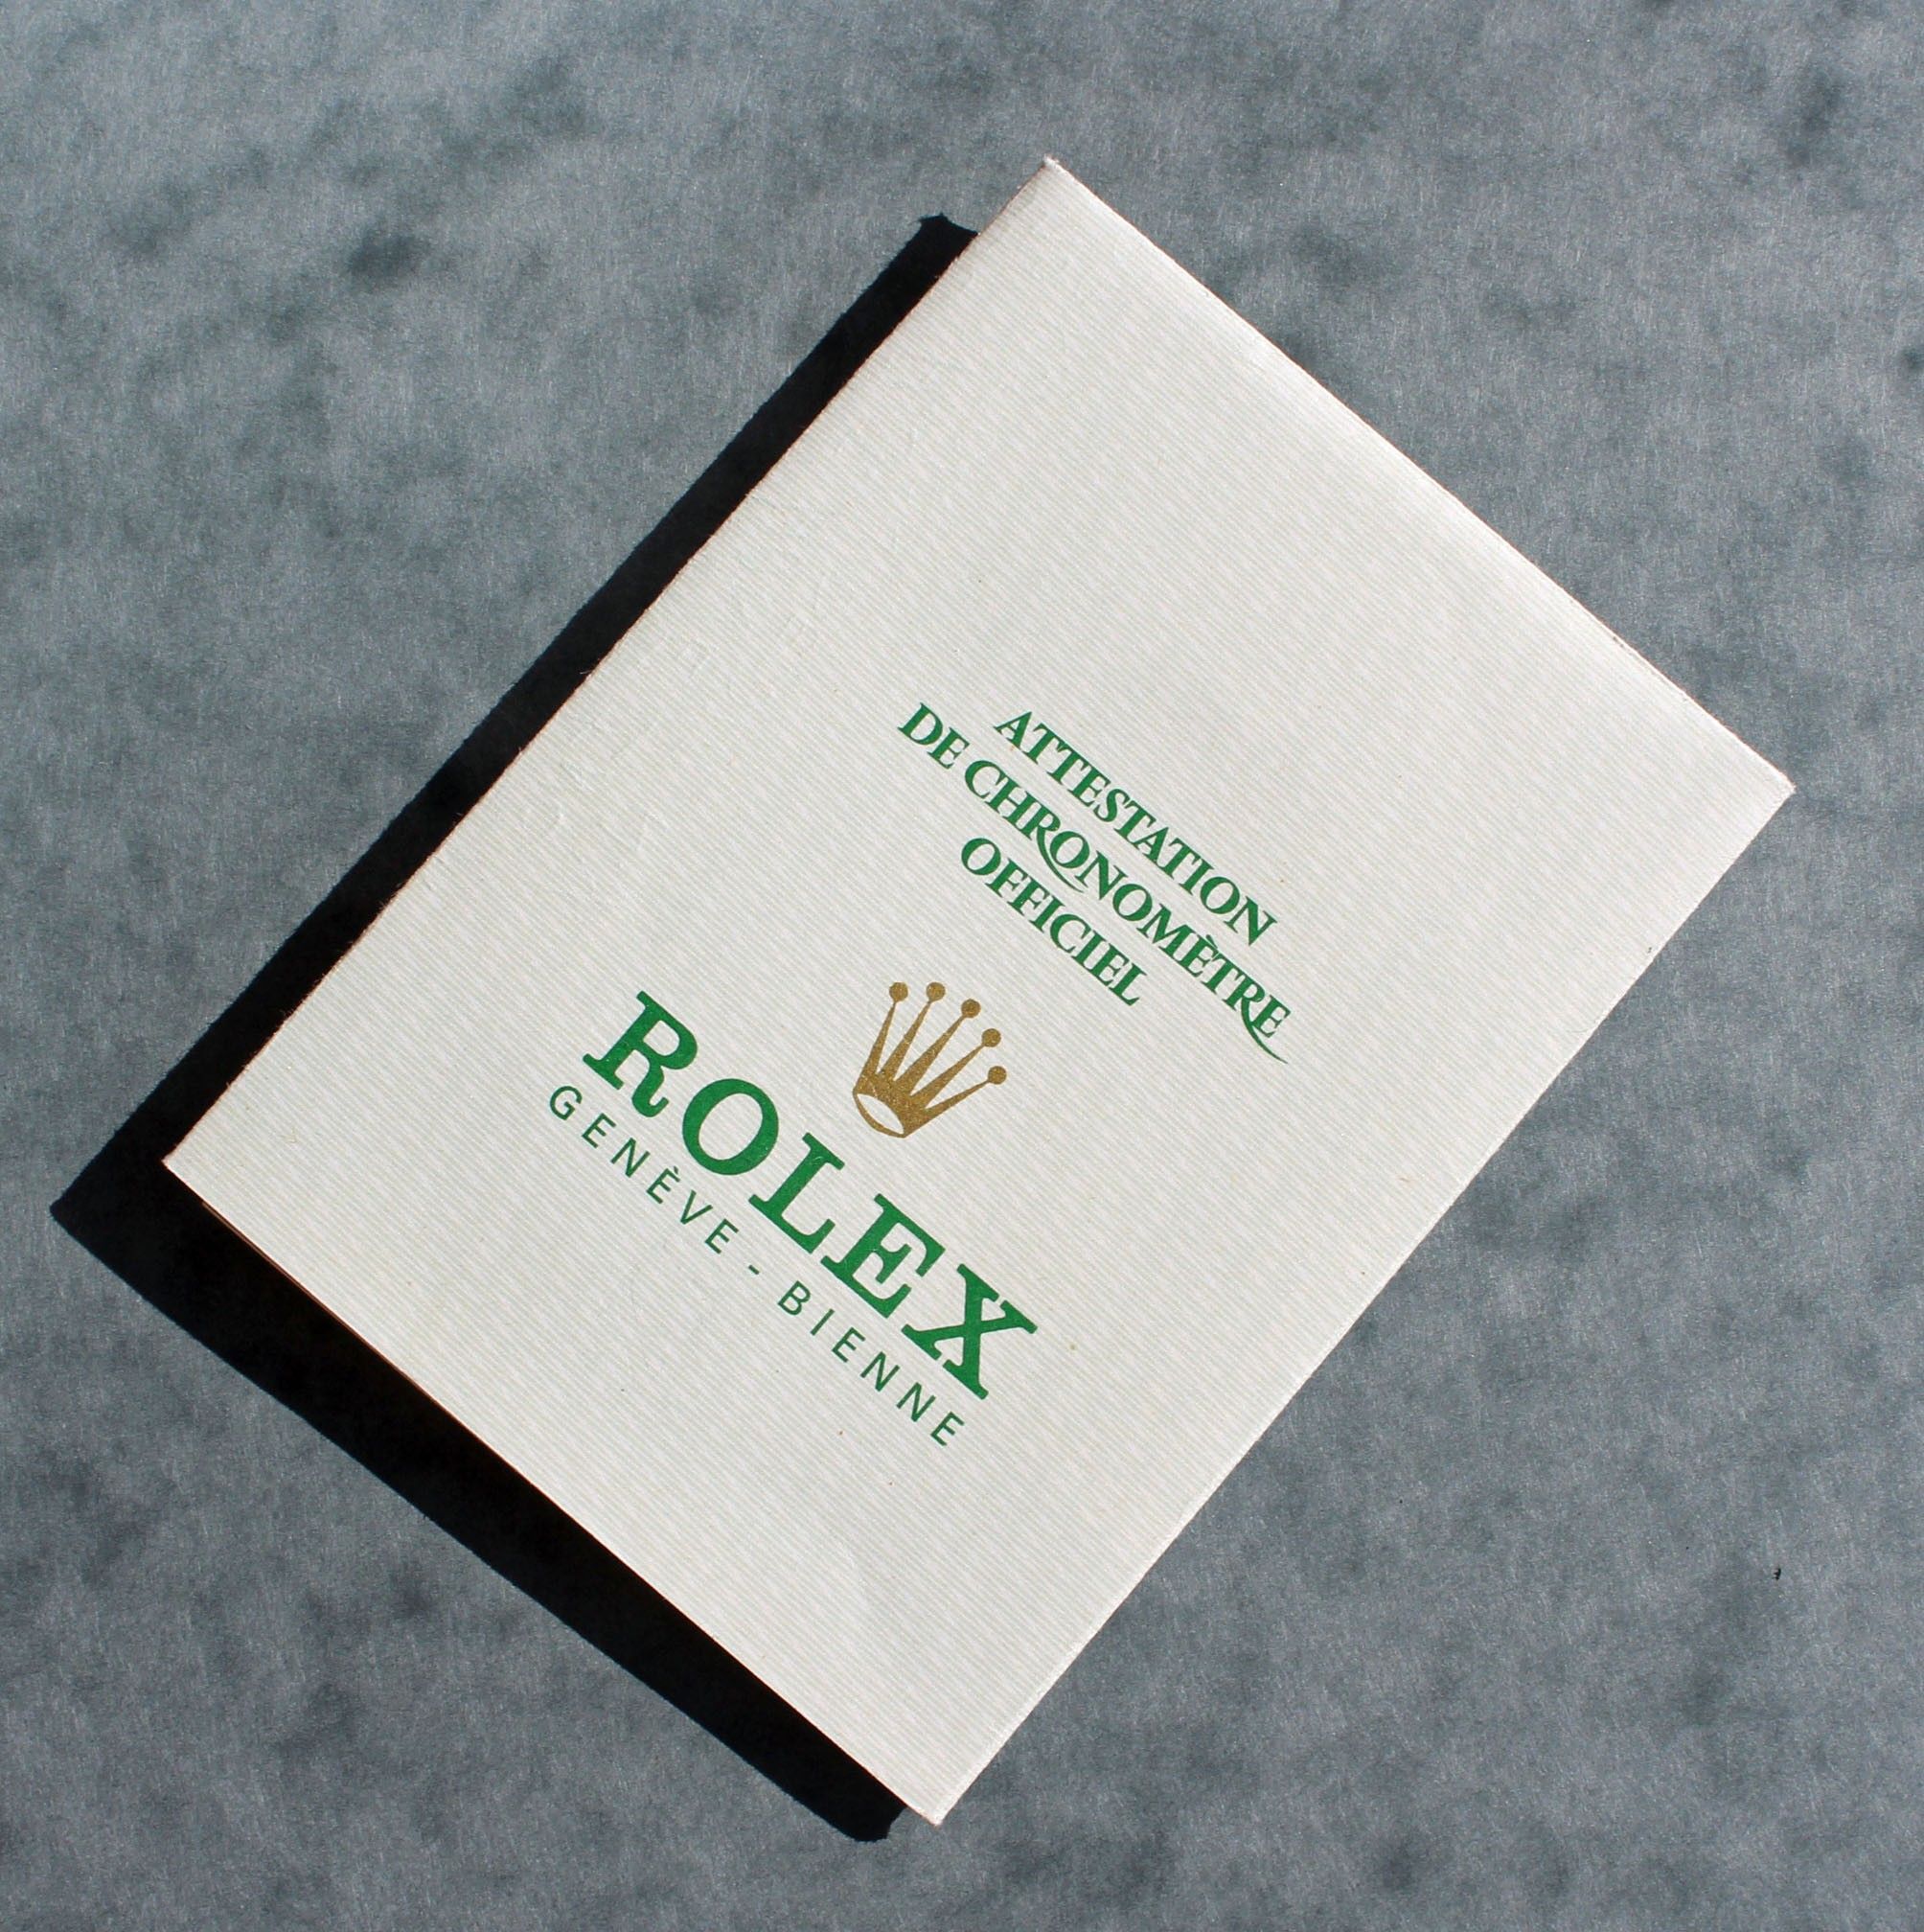 1986 GENUINE VINTAGE PAPER CERTIFICAT PUNCHED ROLEX OYSTER PERPETUAL DATEJUST 16013 WATCHES